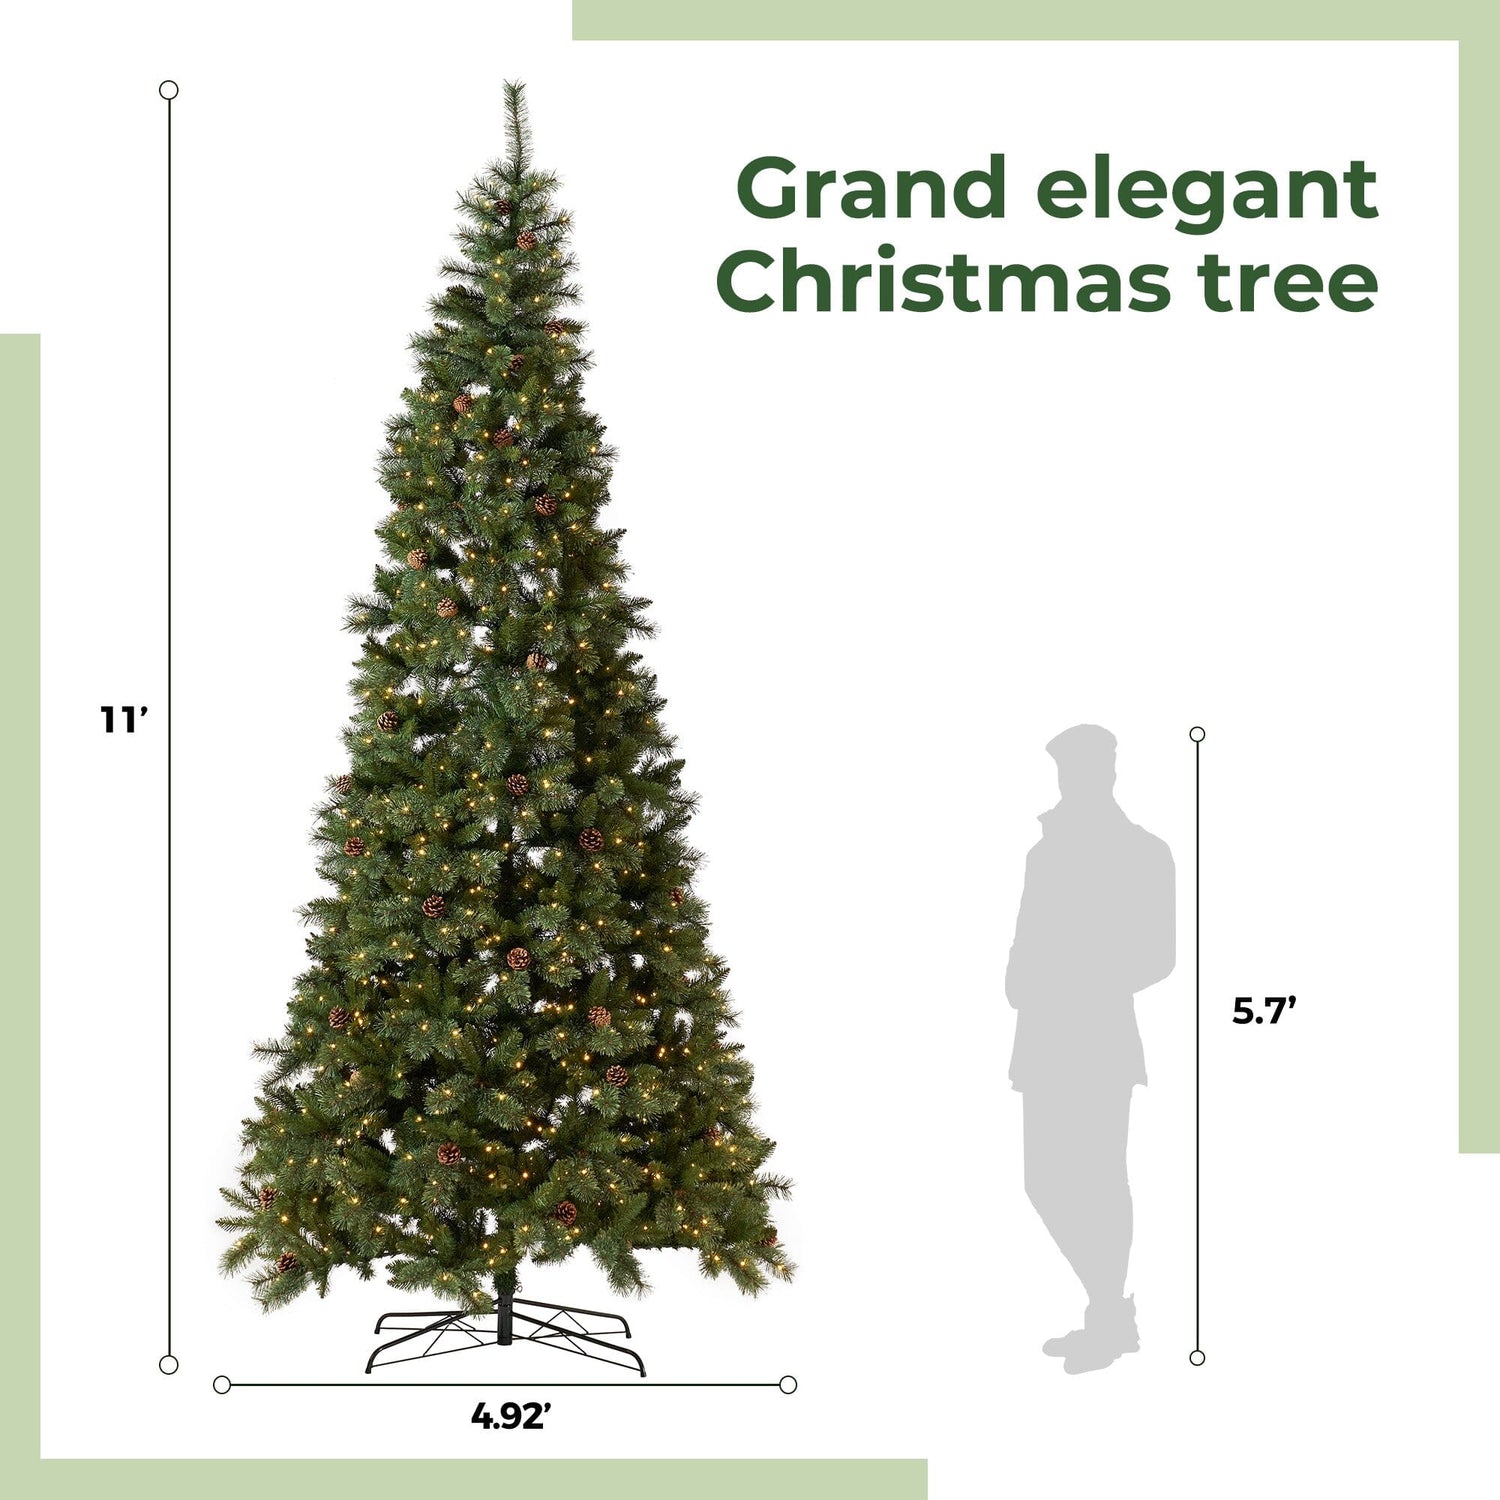 11’ White Mountain Pine Artificial Christmas Tree with 1050 Clear LED Lights, Pine Cones and 2395 Bendable Branches